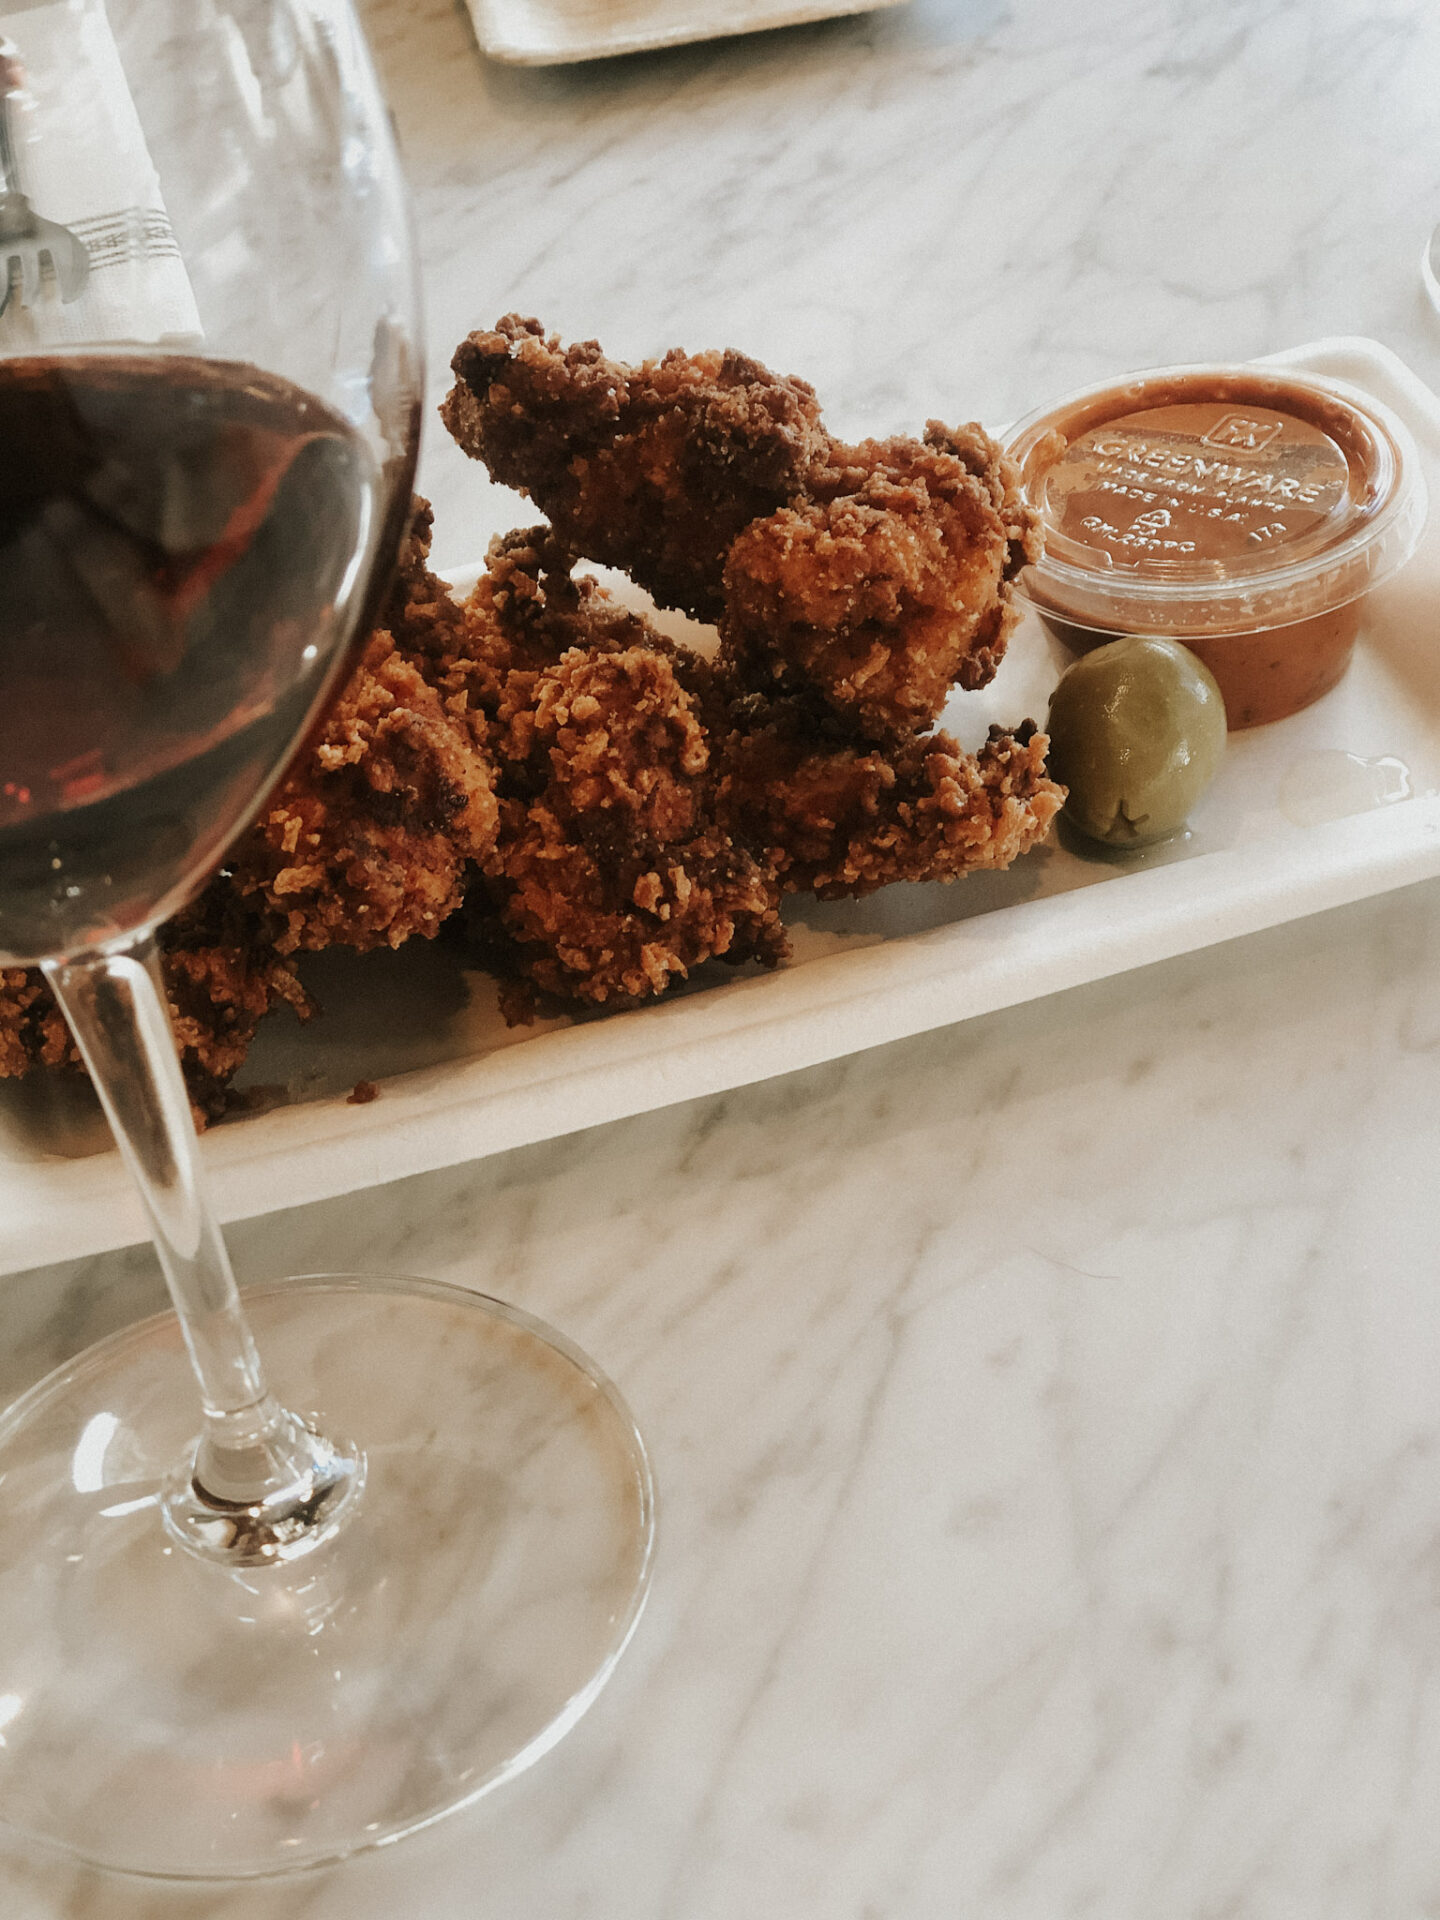 Alpha Omega Collective Downtown Napa Tasting Room Fried Chicken and Wine